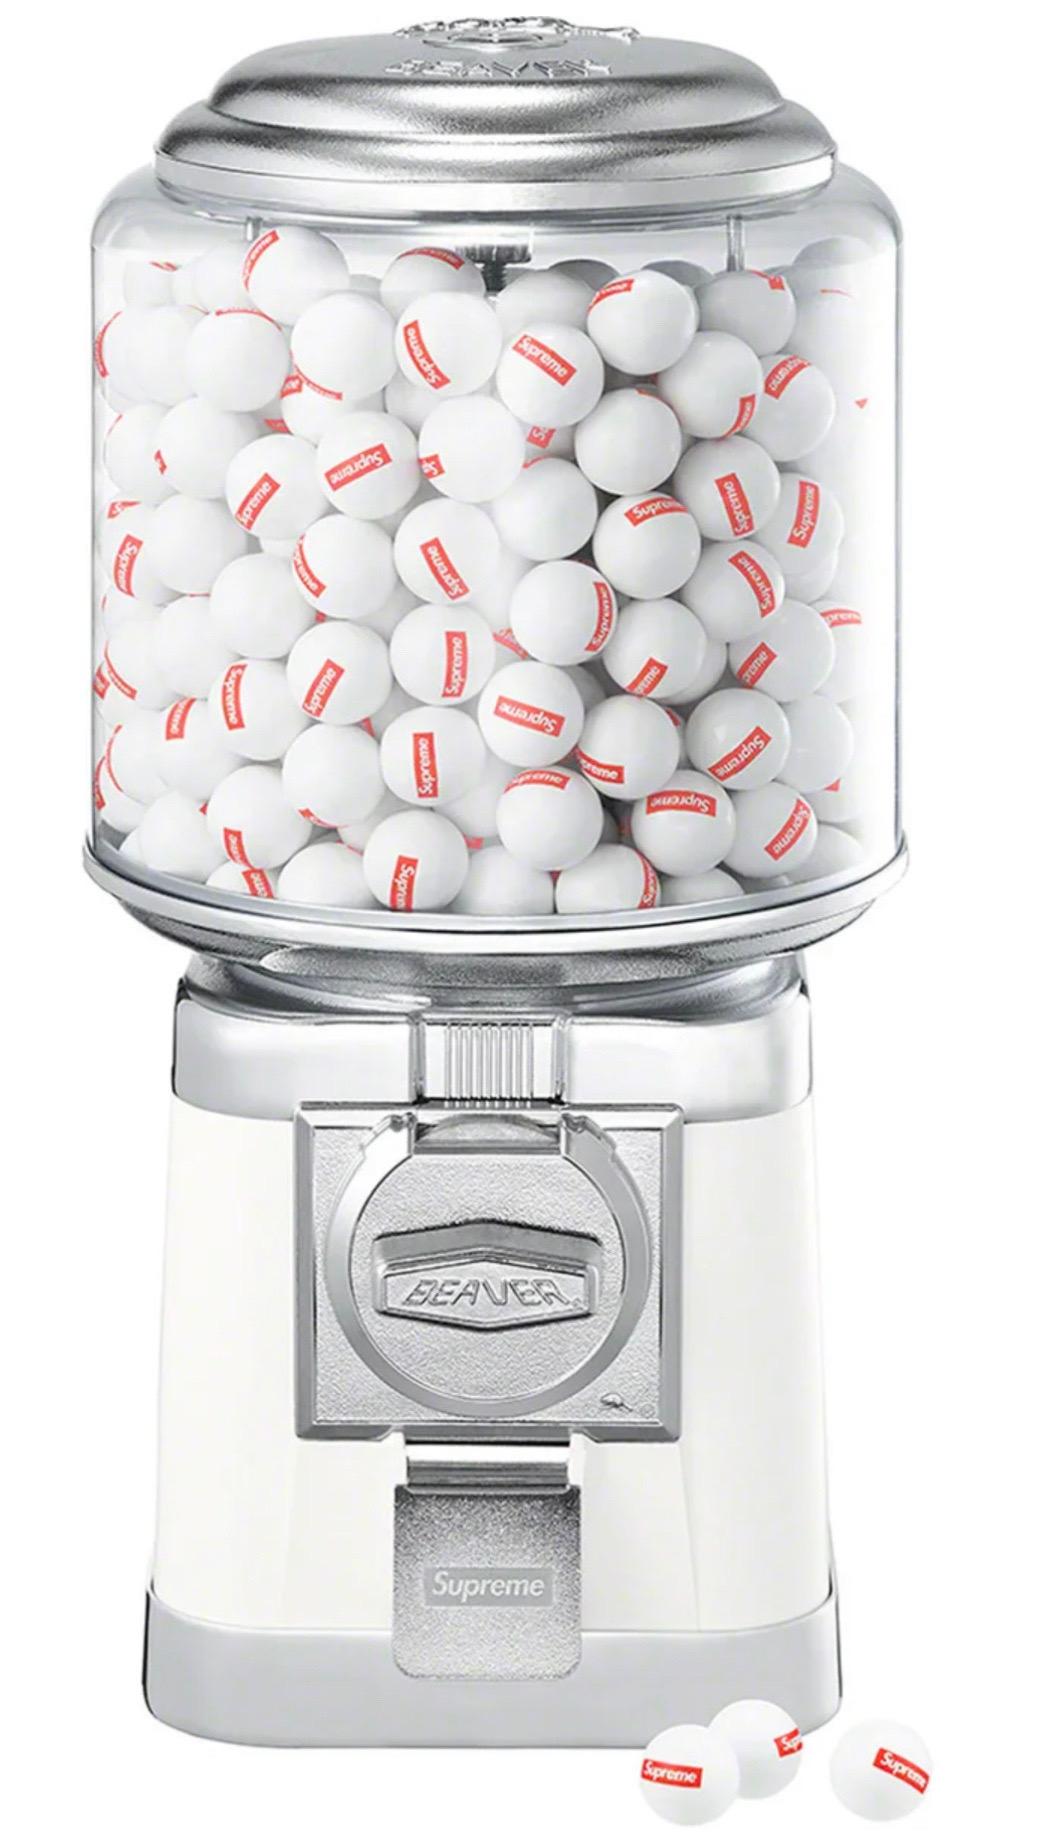 Supreme x beever fall 2022 gumball machine, Fall/Winter 2022, white and red. Free-vend gumball machine with 8.5